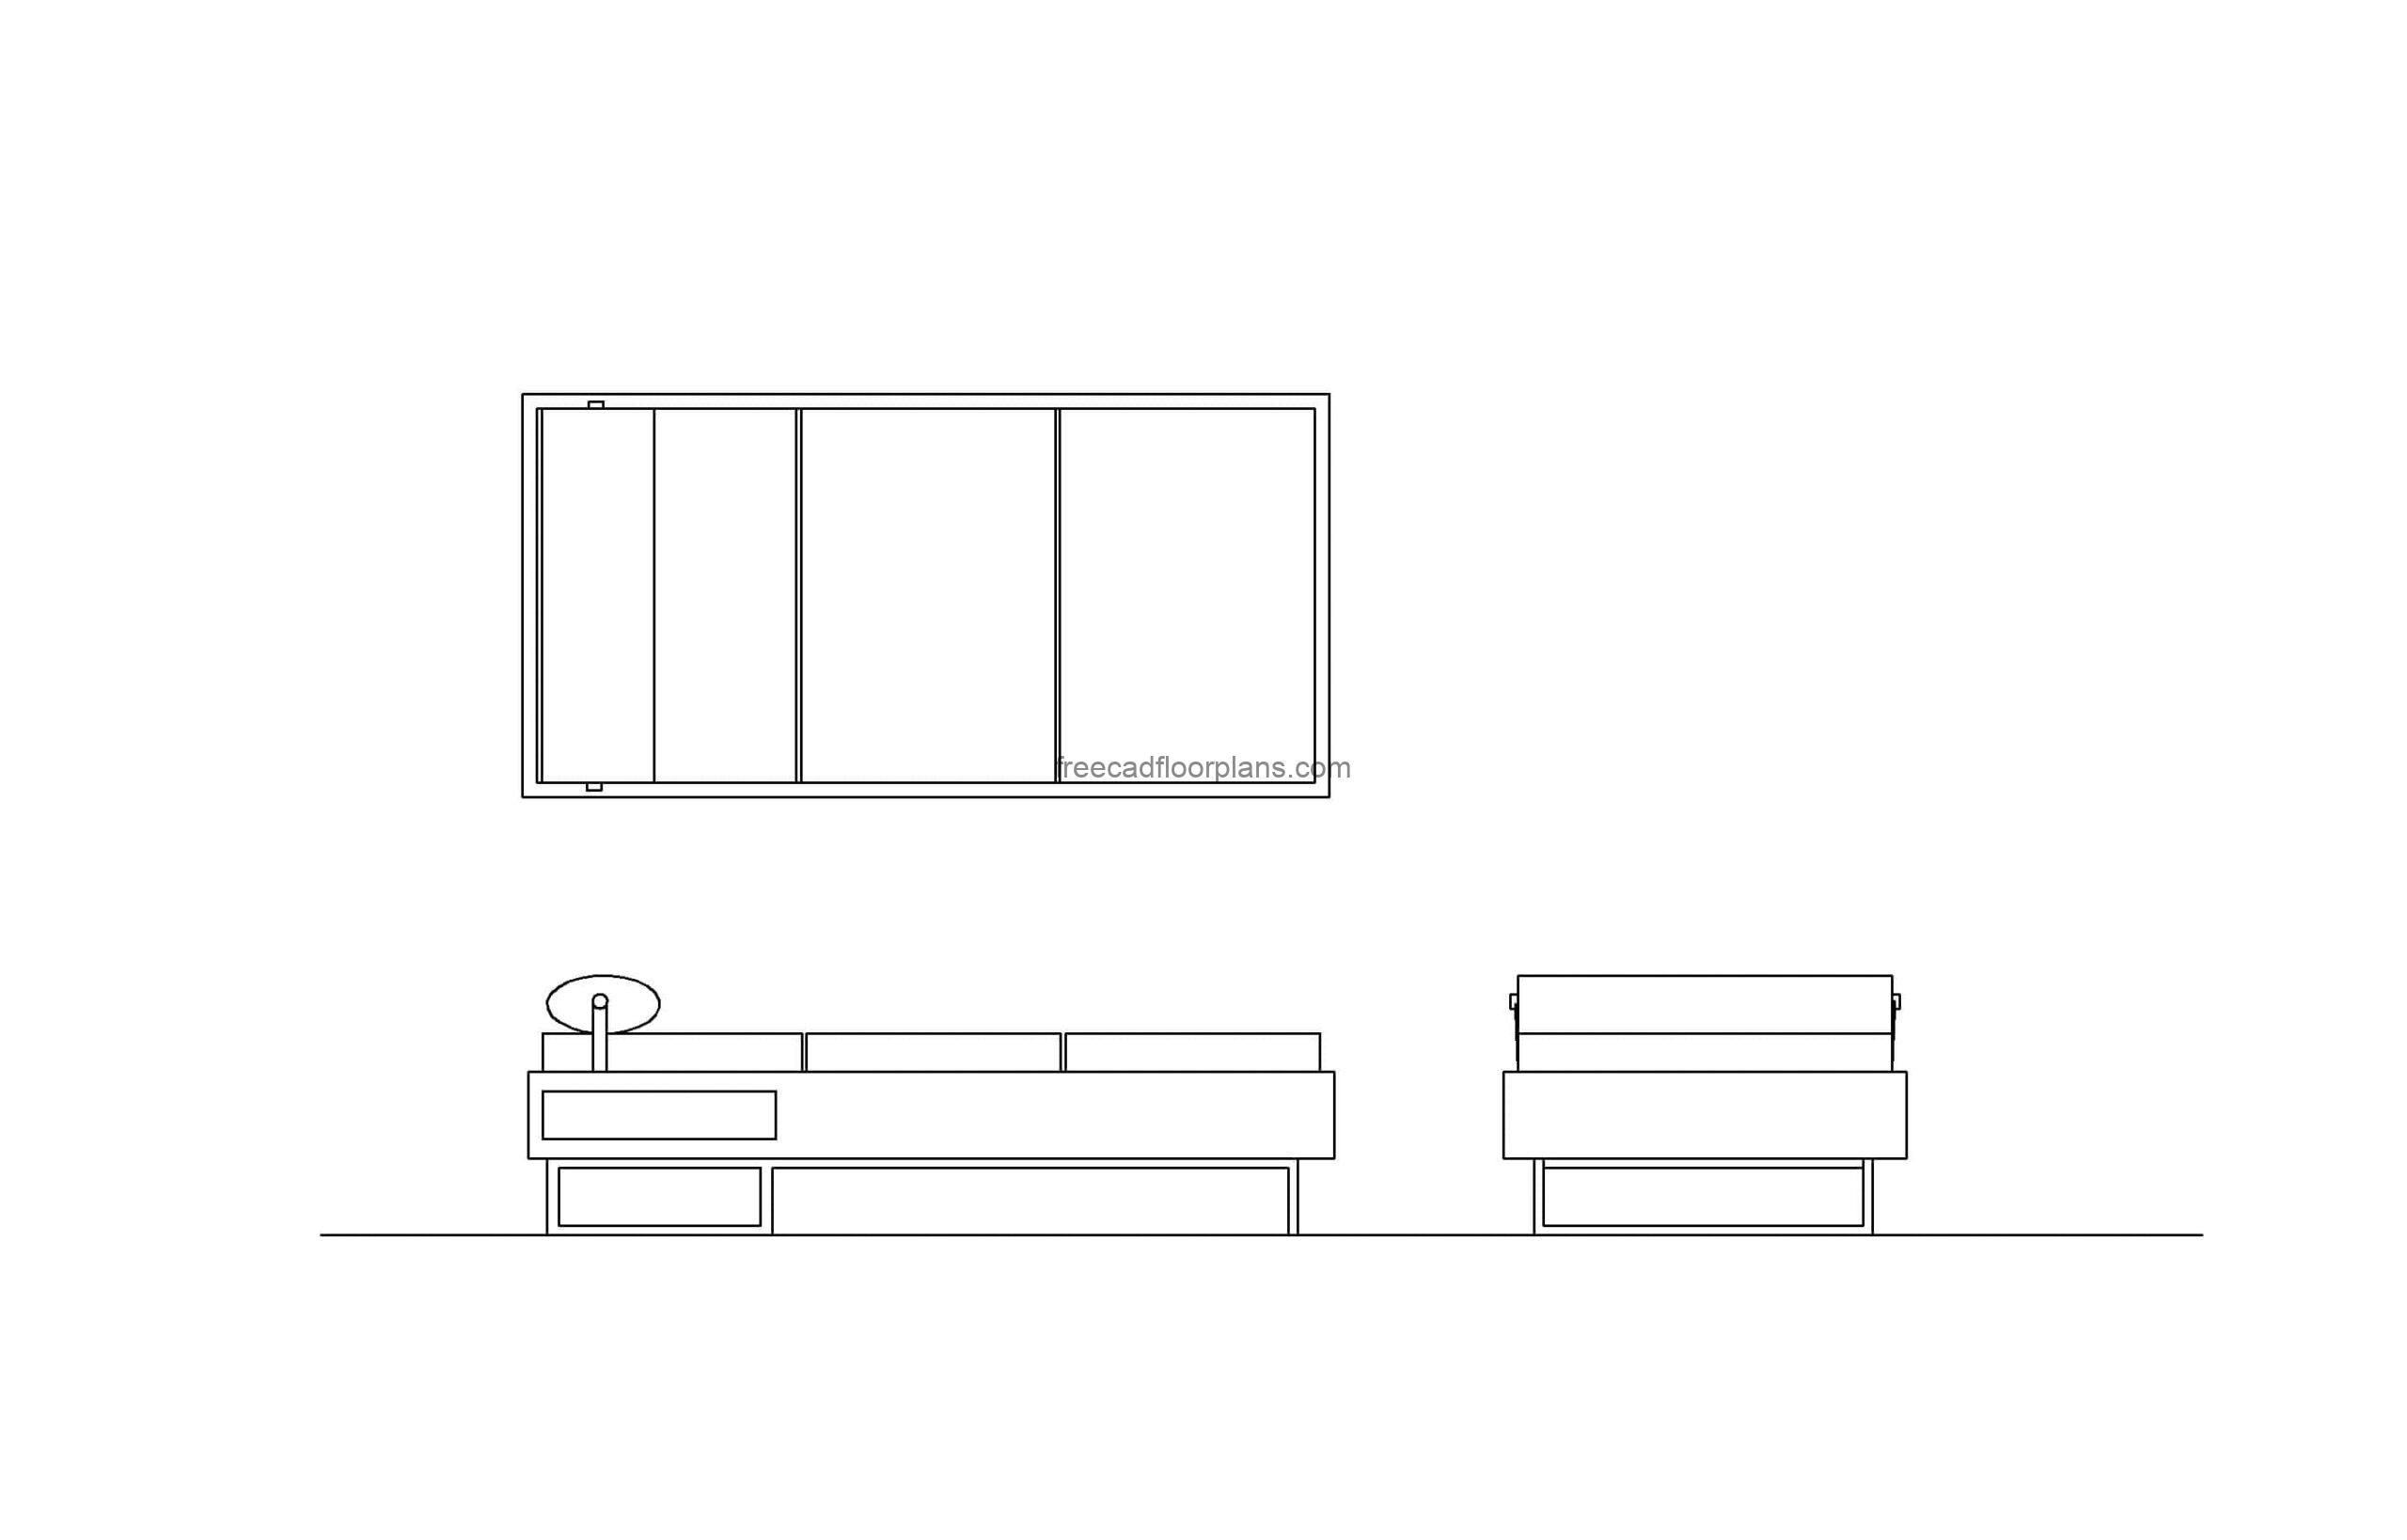 day bed couch autocad drawing, dwg file with 2d plan and elevations views, for free download